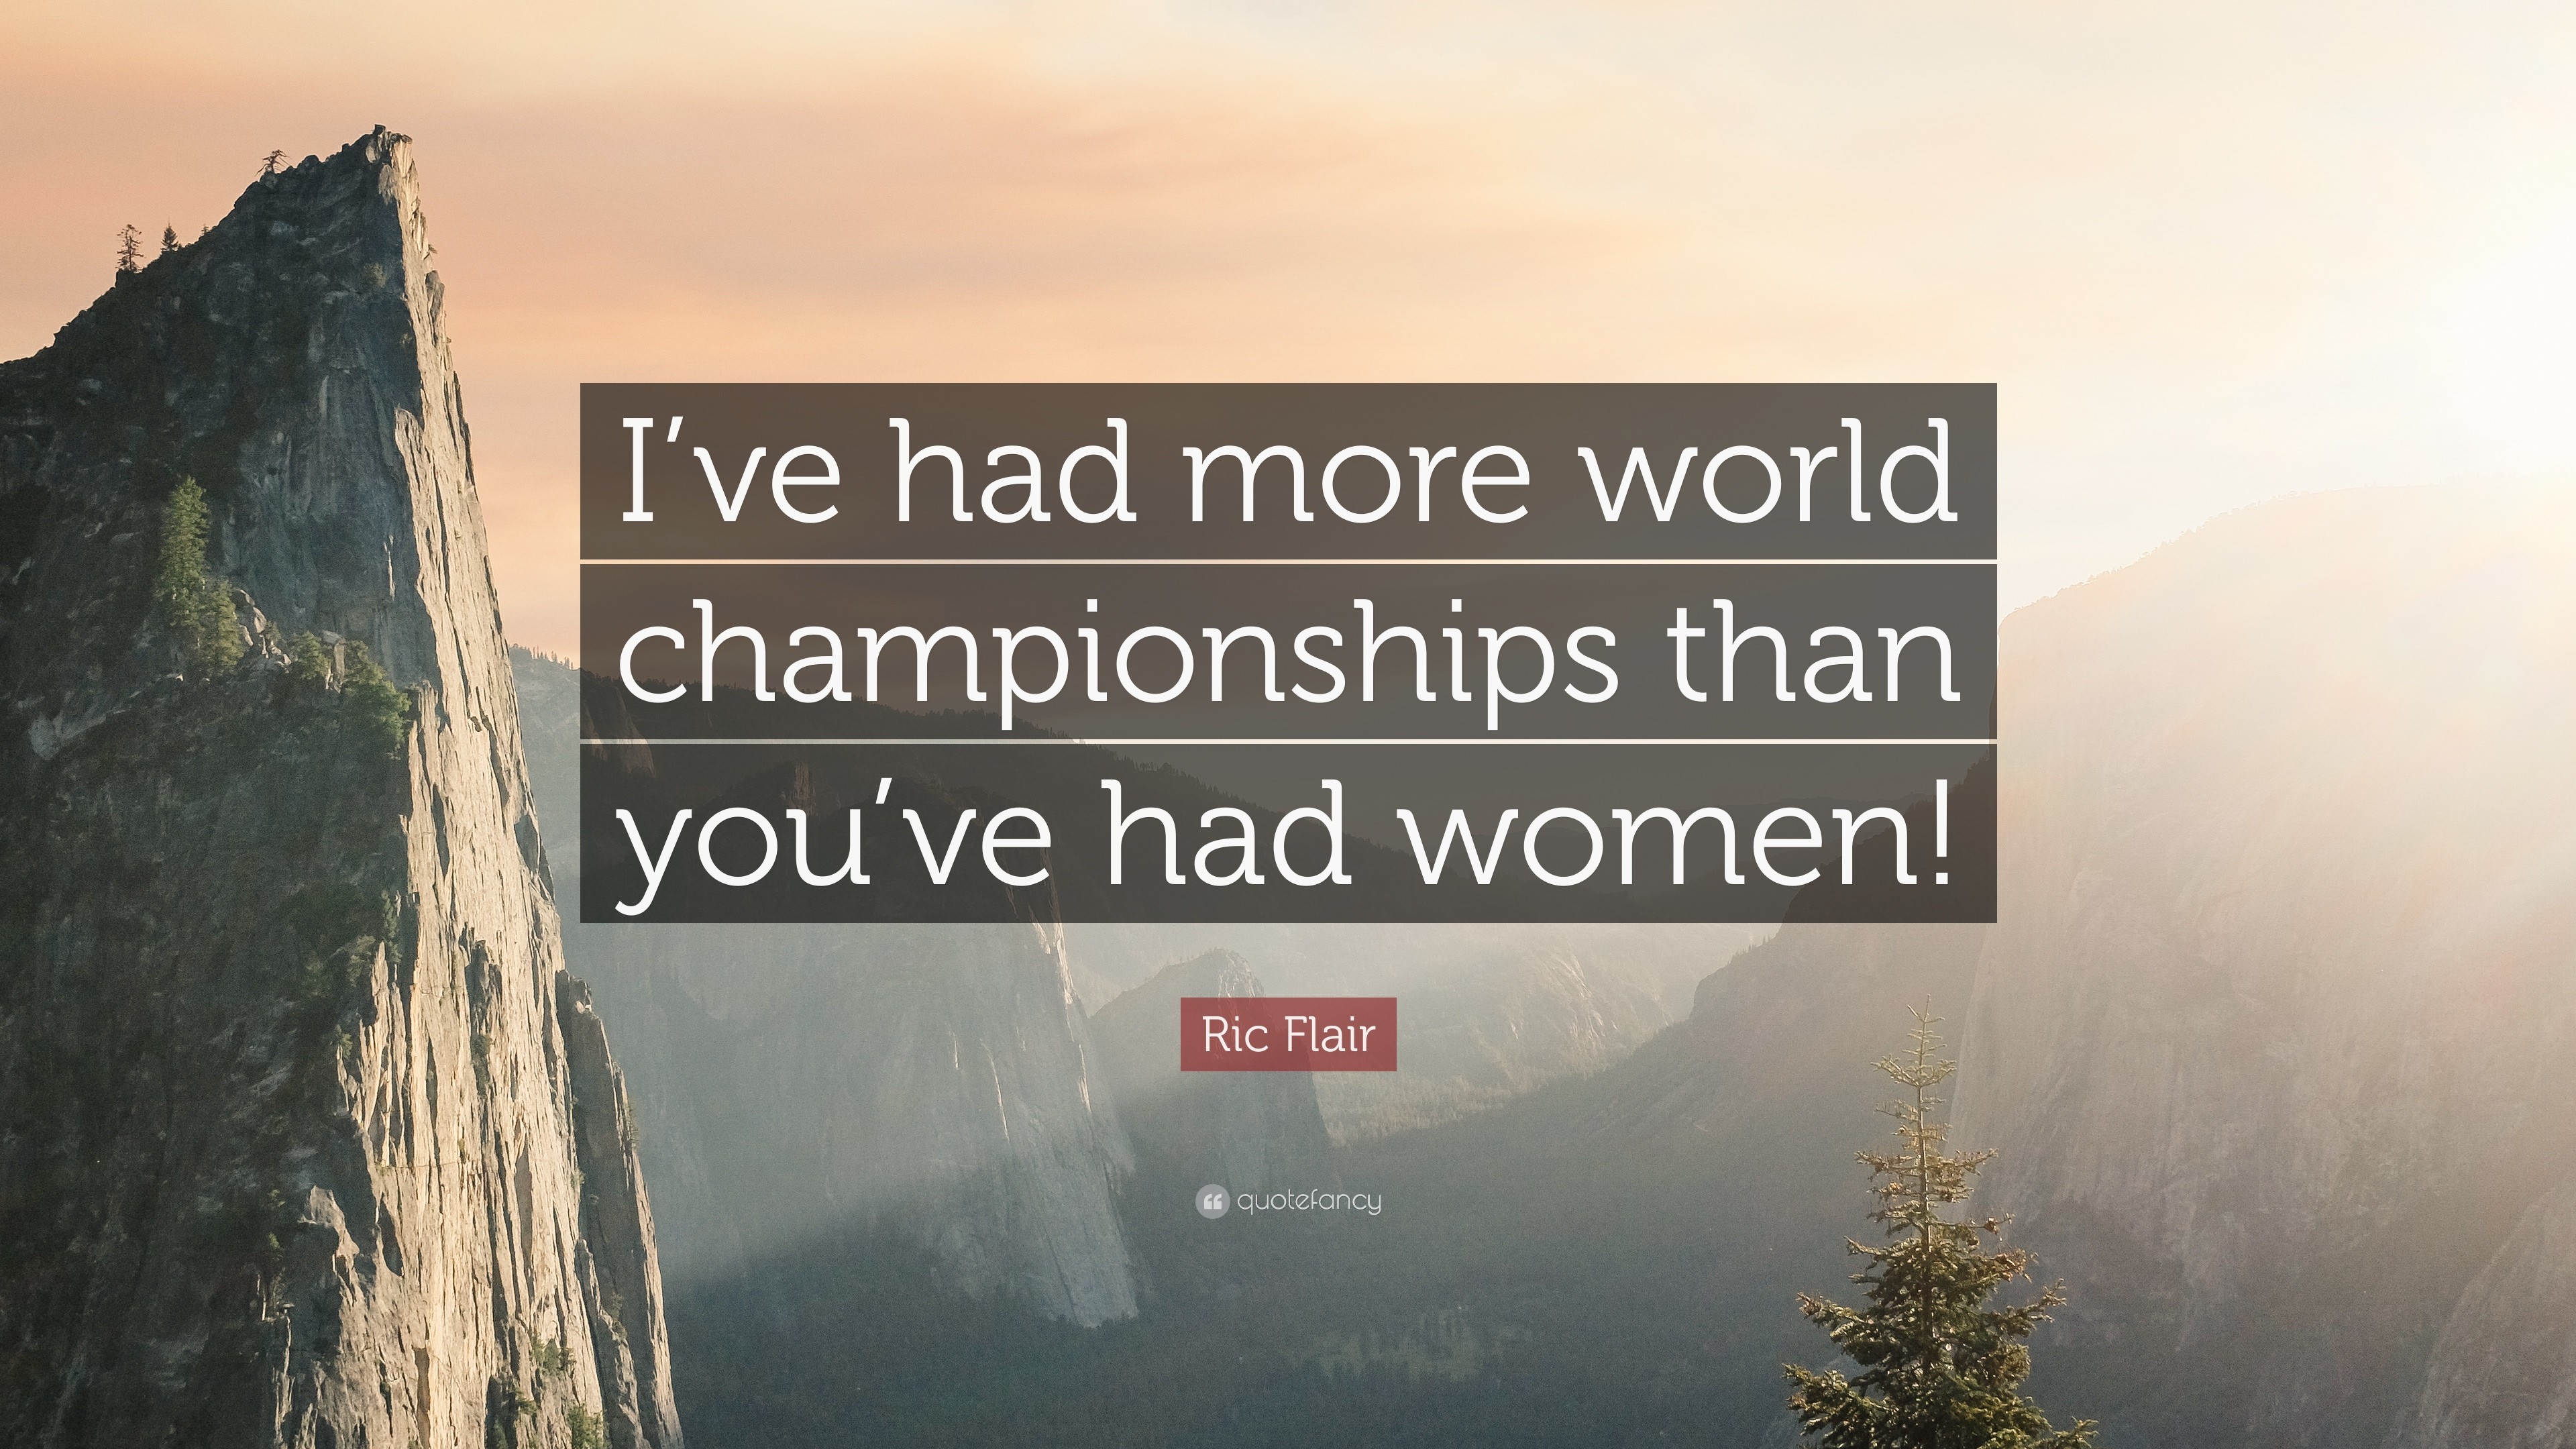 3840x2160 Ric Flair Quote: “I've had more world championships than you've